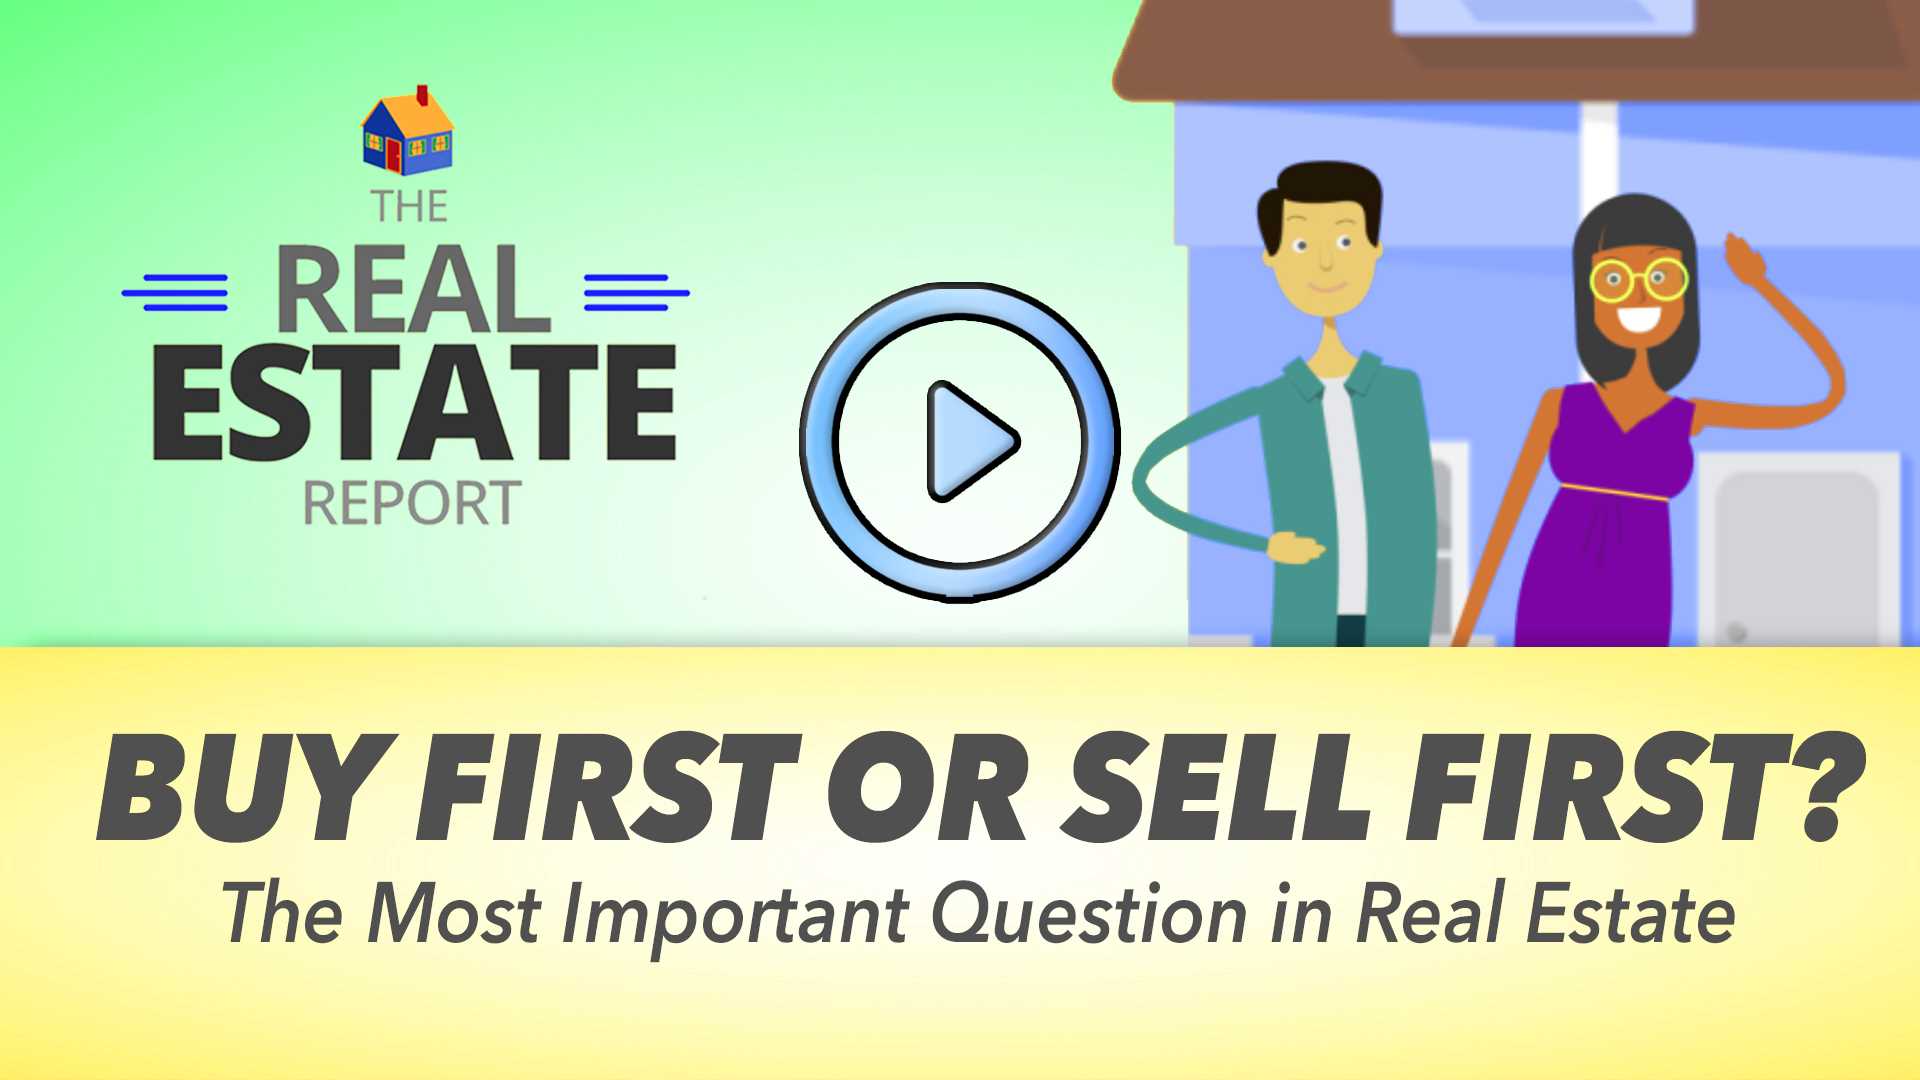 The Real Estate Catch 22 - Buy First Or Sell First?